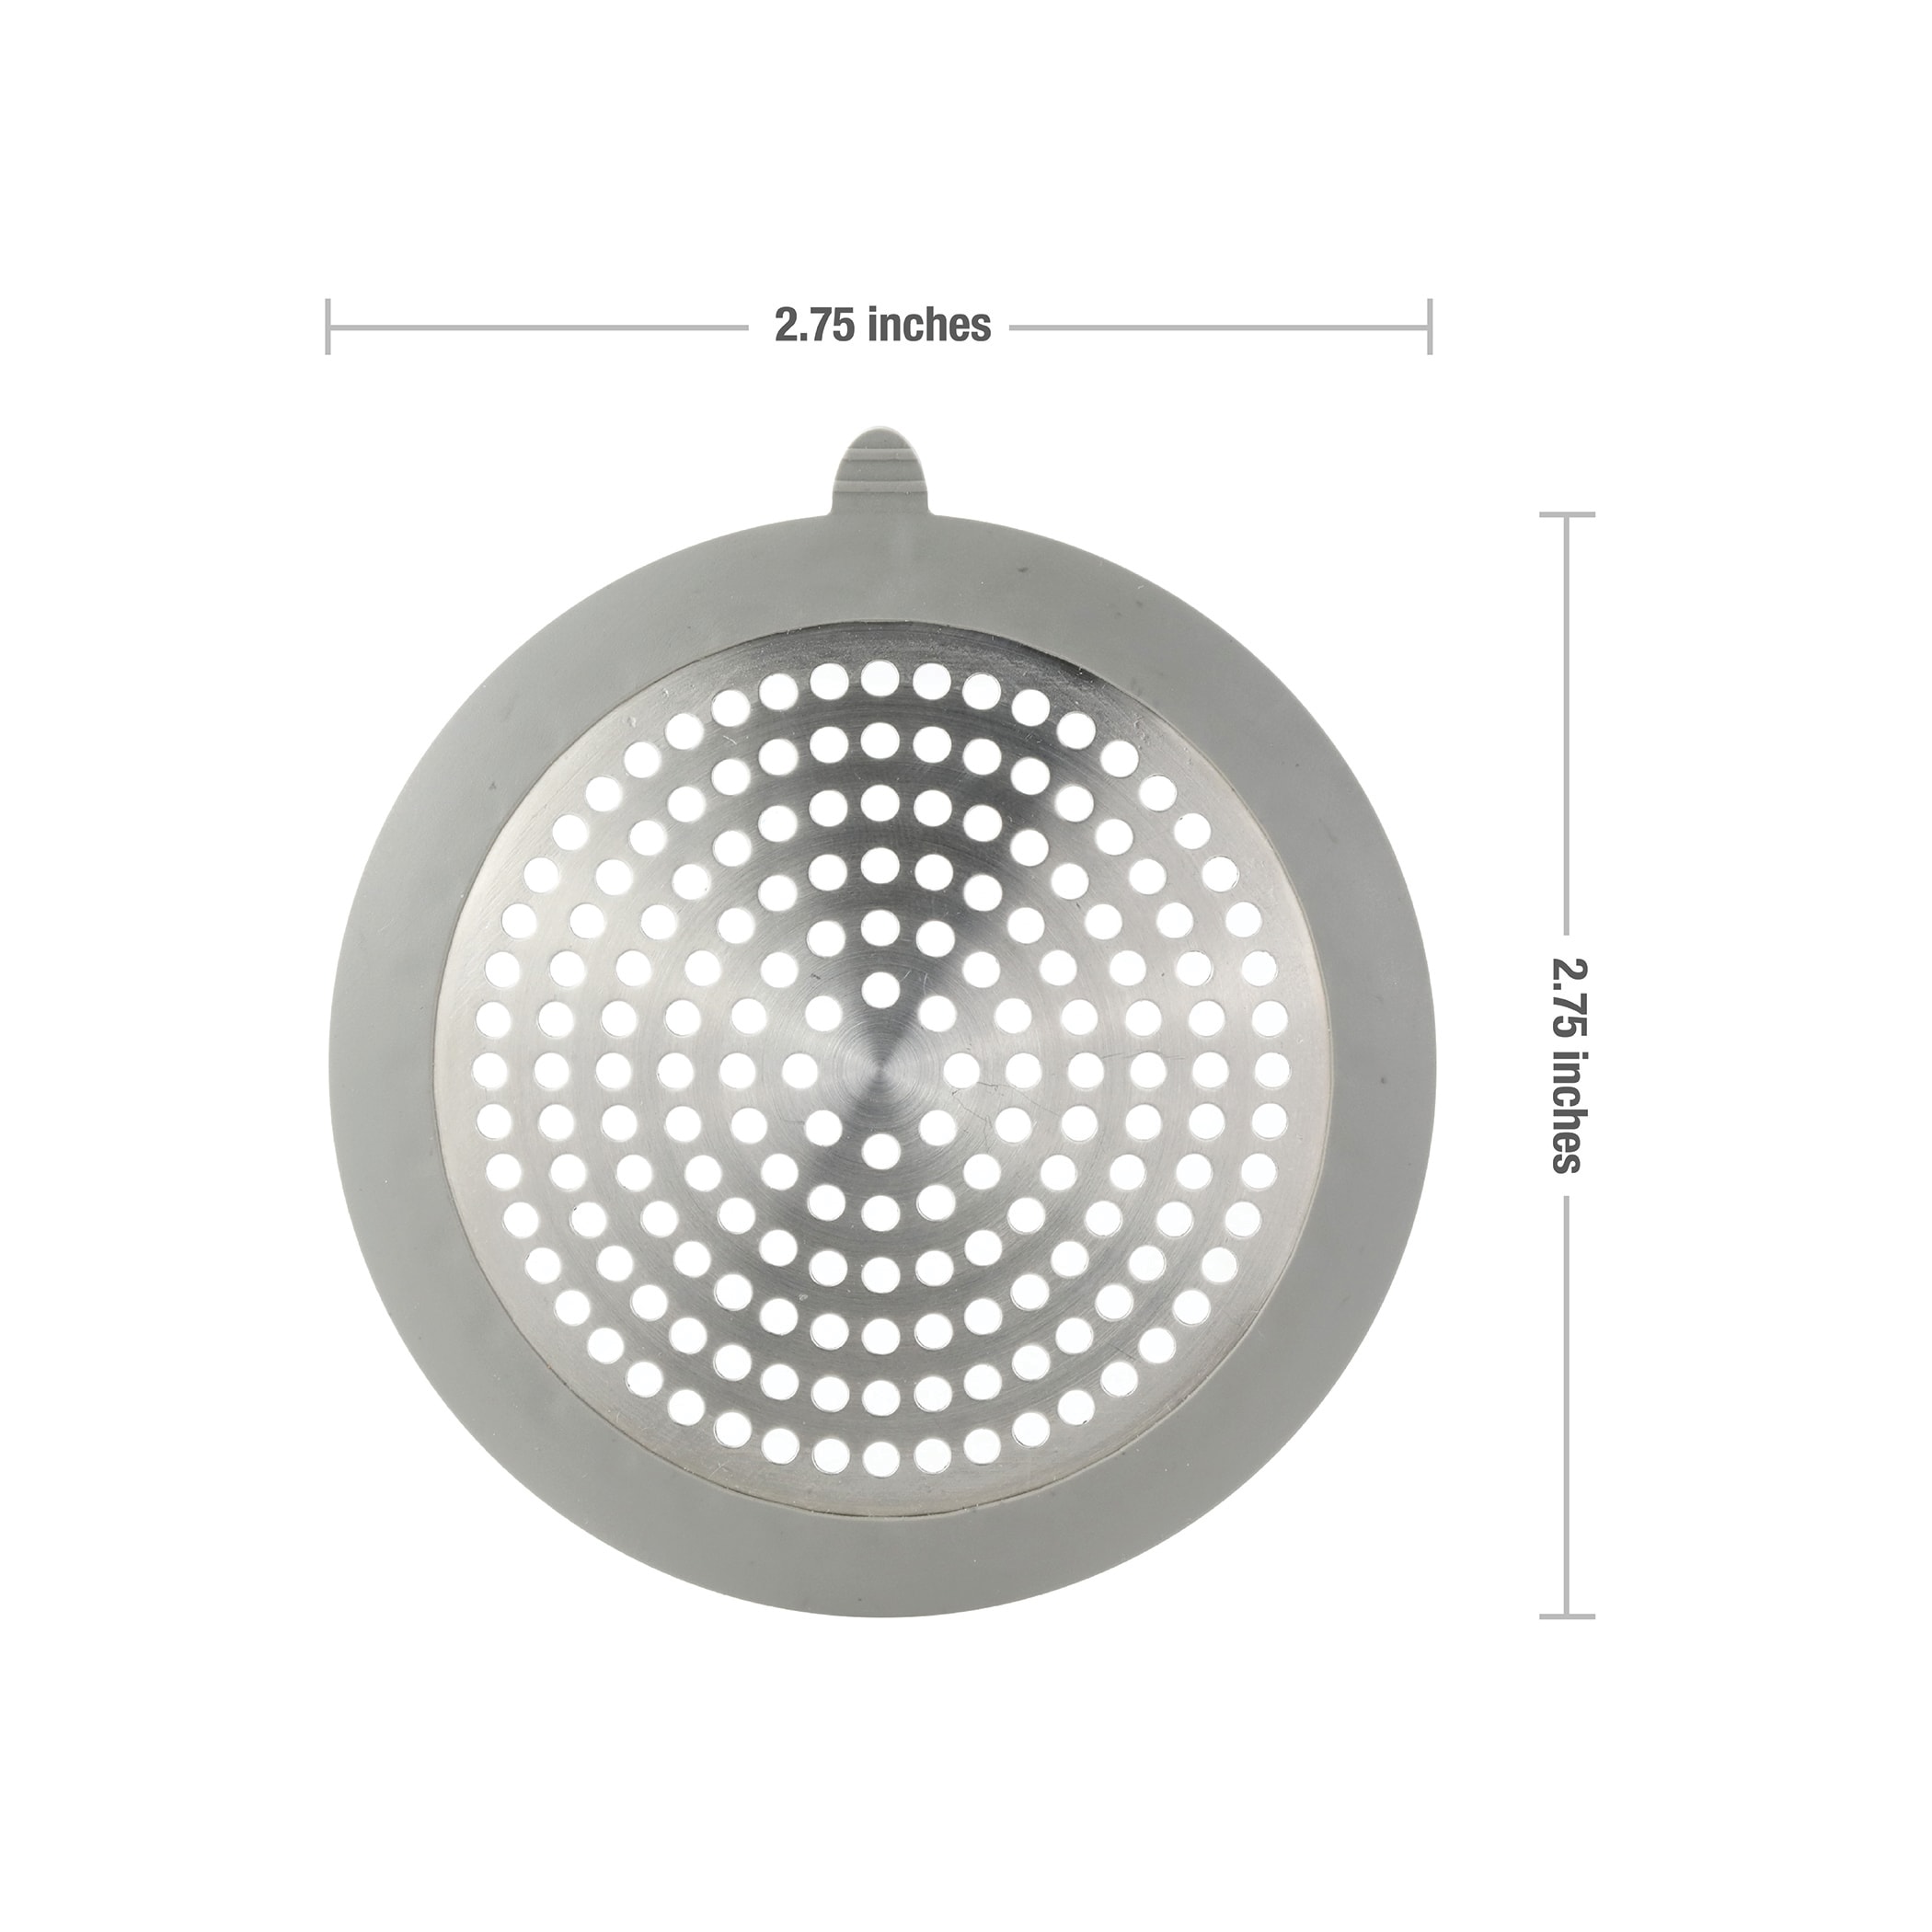 Dyiom 5.9 W x 5.9 D Gray Round Drain Cover for Shower Silicone Hair Stopper  with Suction Cups B0BZMXJZYY - The Home Depot